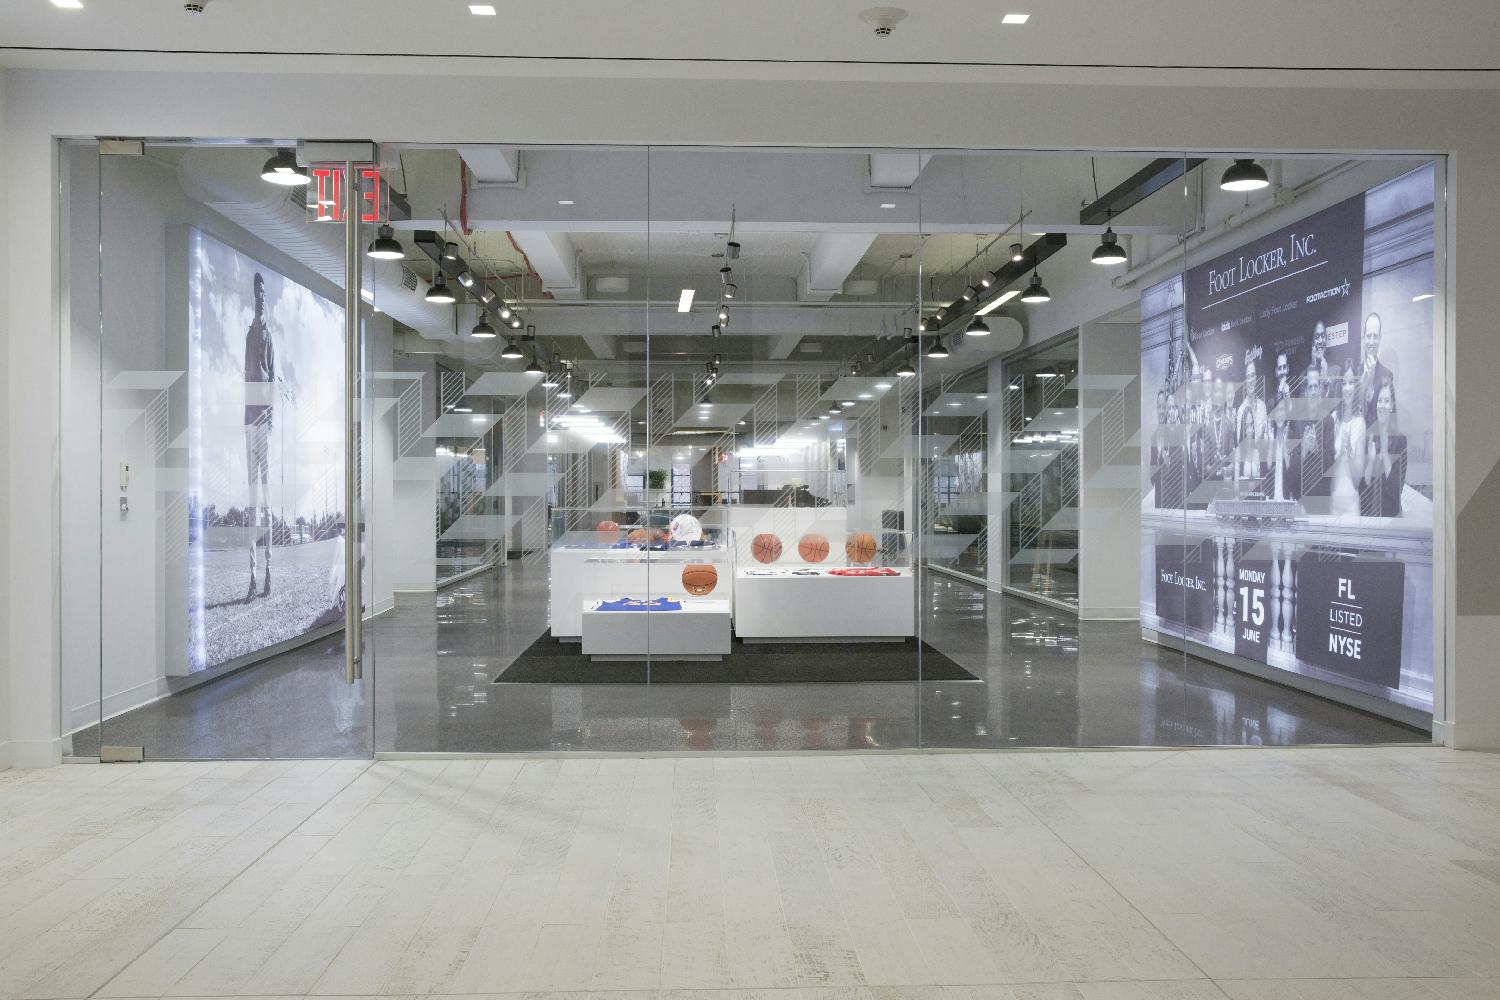 Foot Locker, Inc.’s HQ in NYC highlights the intersection of our dynamic sports and sneaker culture.